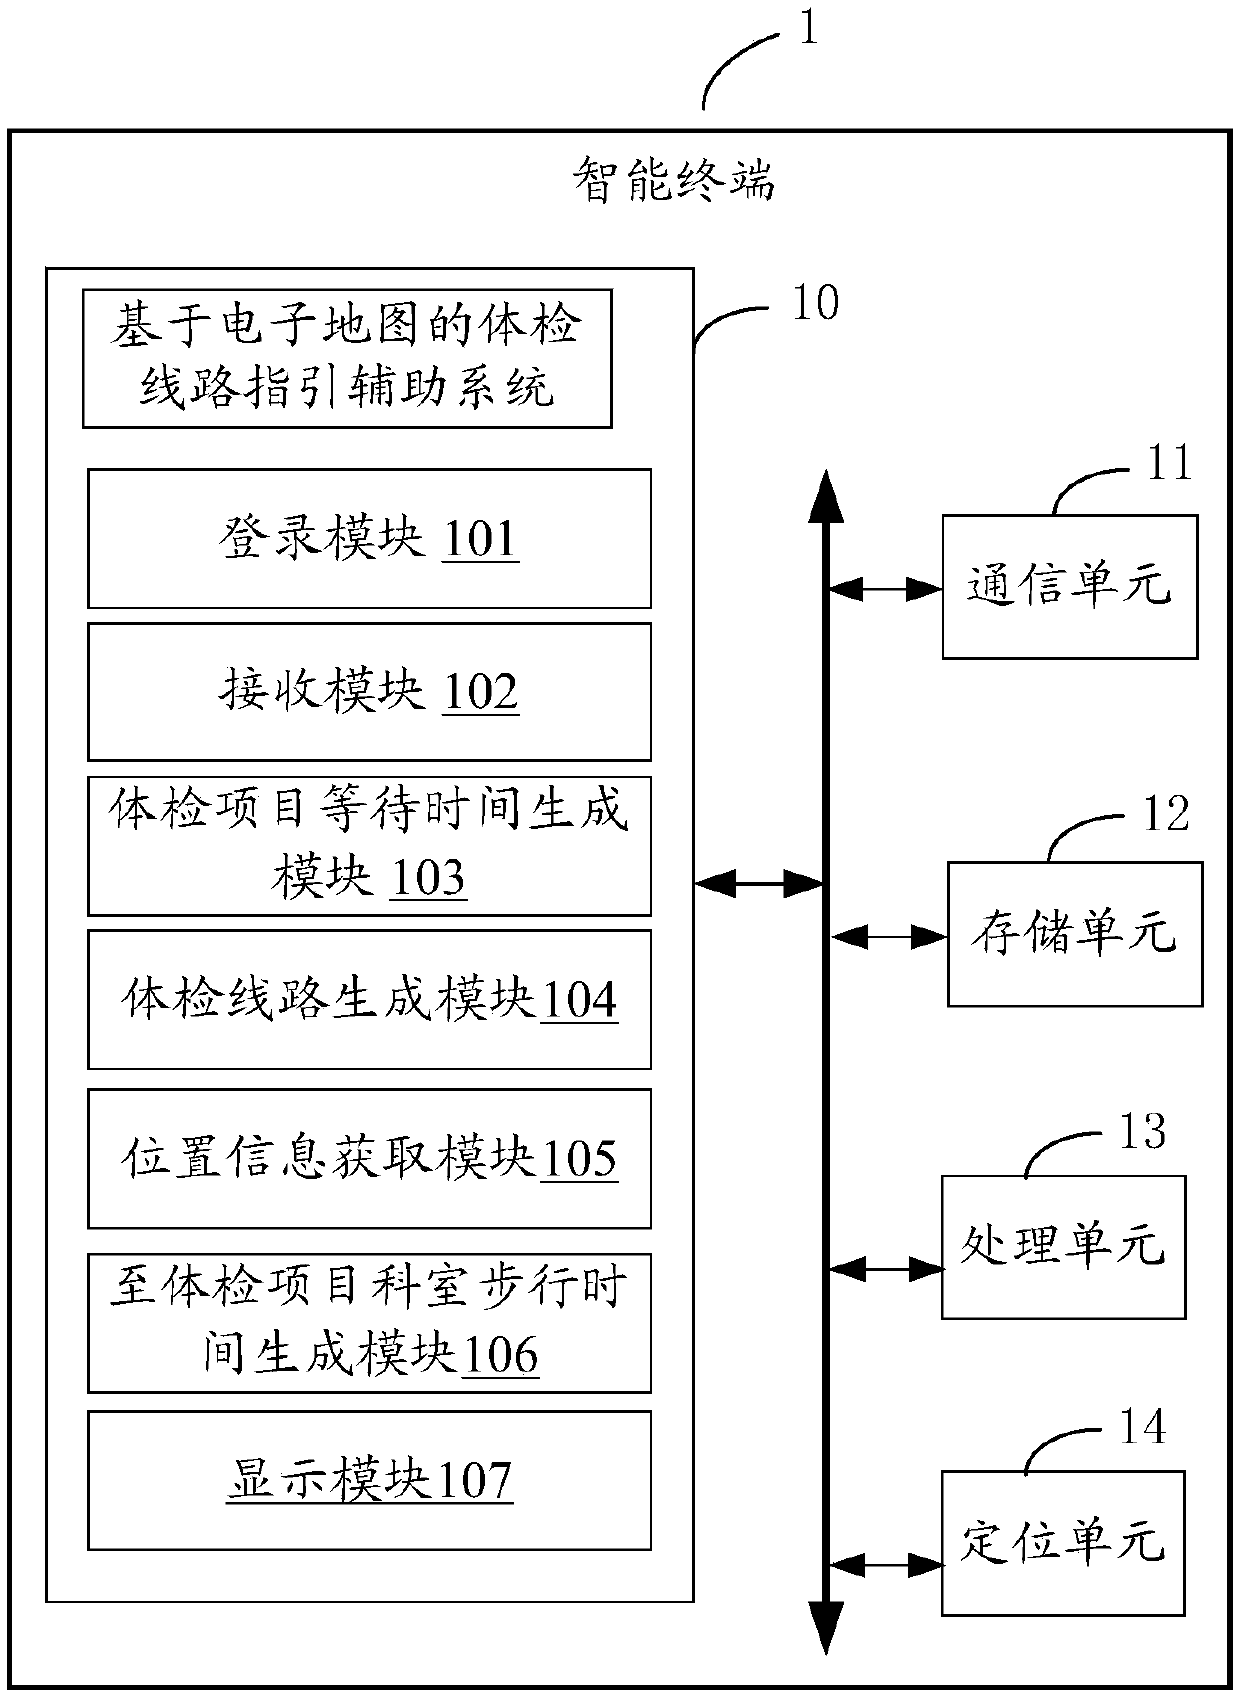 Physical examination route guidance assisting system and method based on electronic map